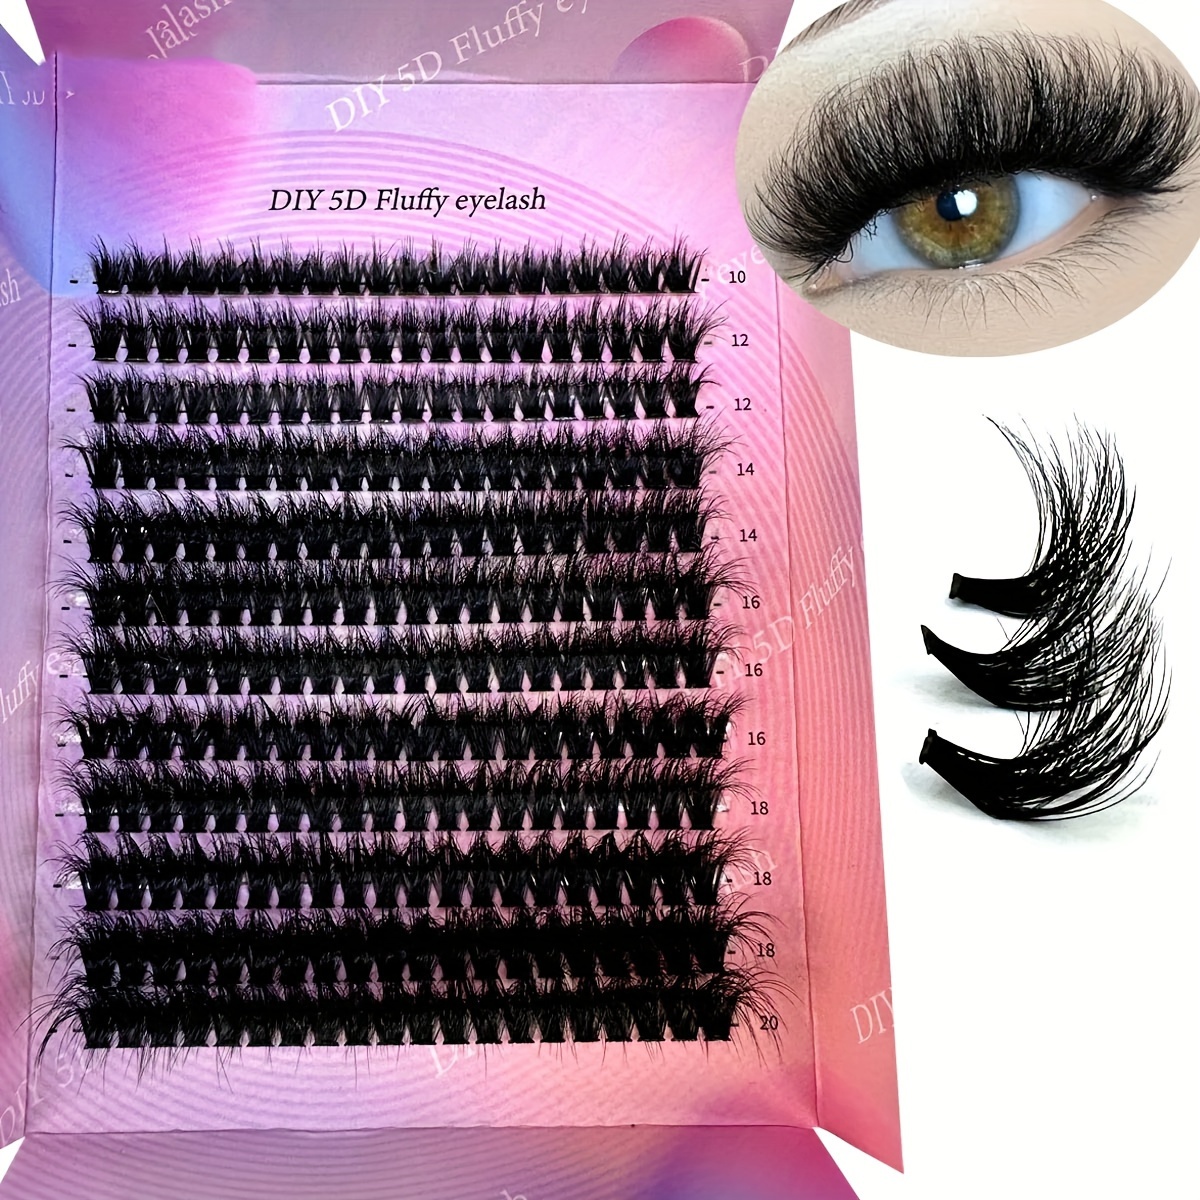 

240 Pcs Diy 5d Fluffy Eyelash Clusters, 80d Thick Volume Cc Wispy Individual Lashes, 10-20mm Cluster Extensions For Personal Use